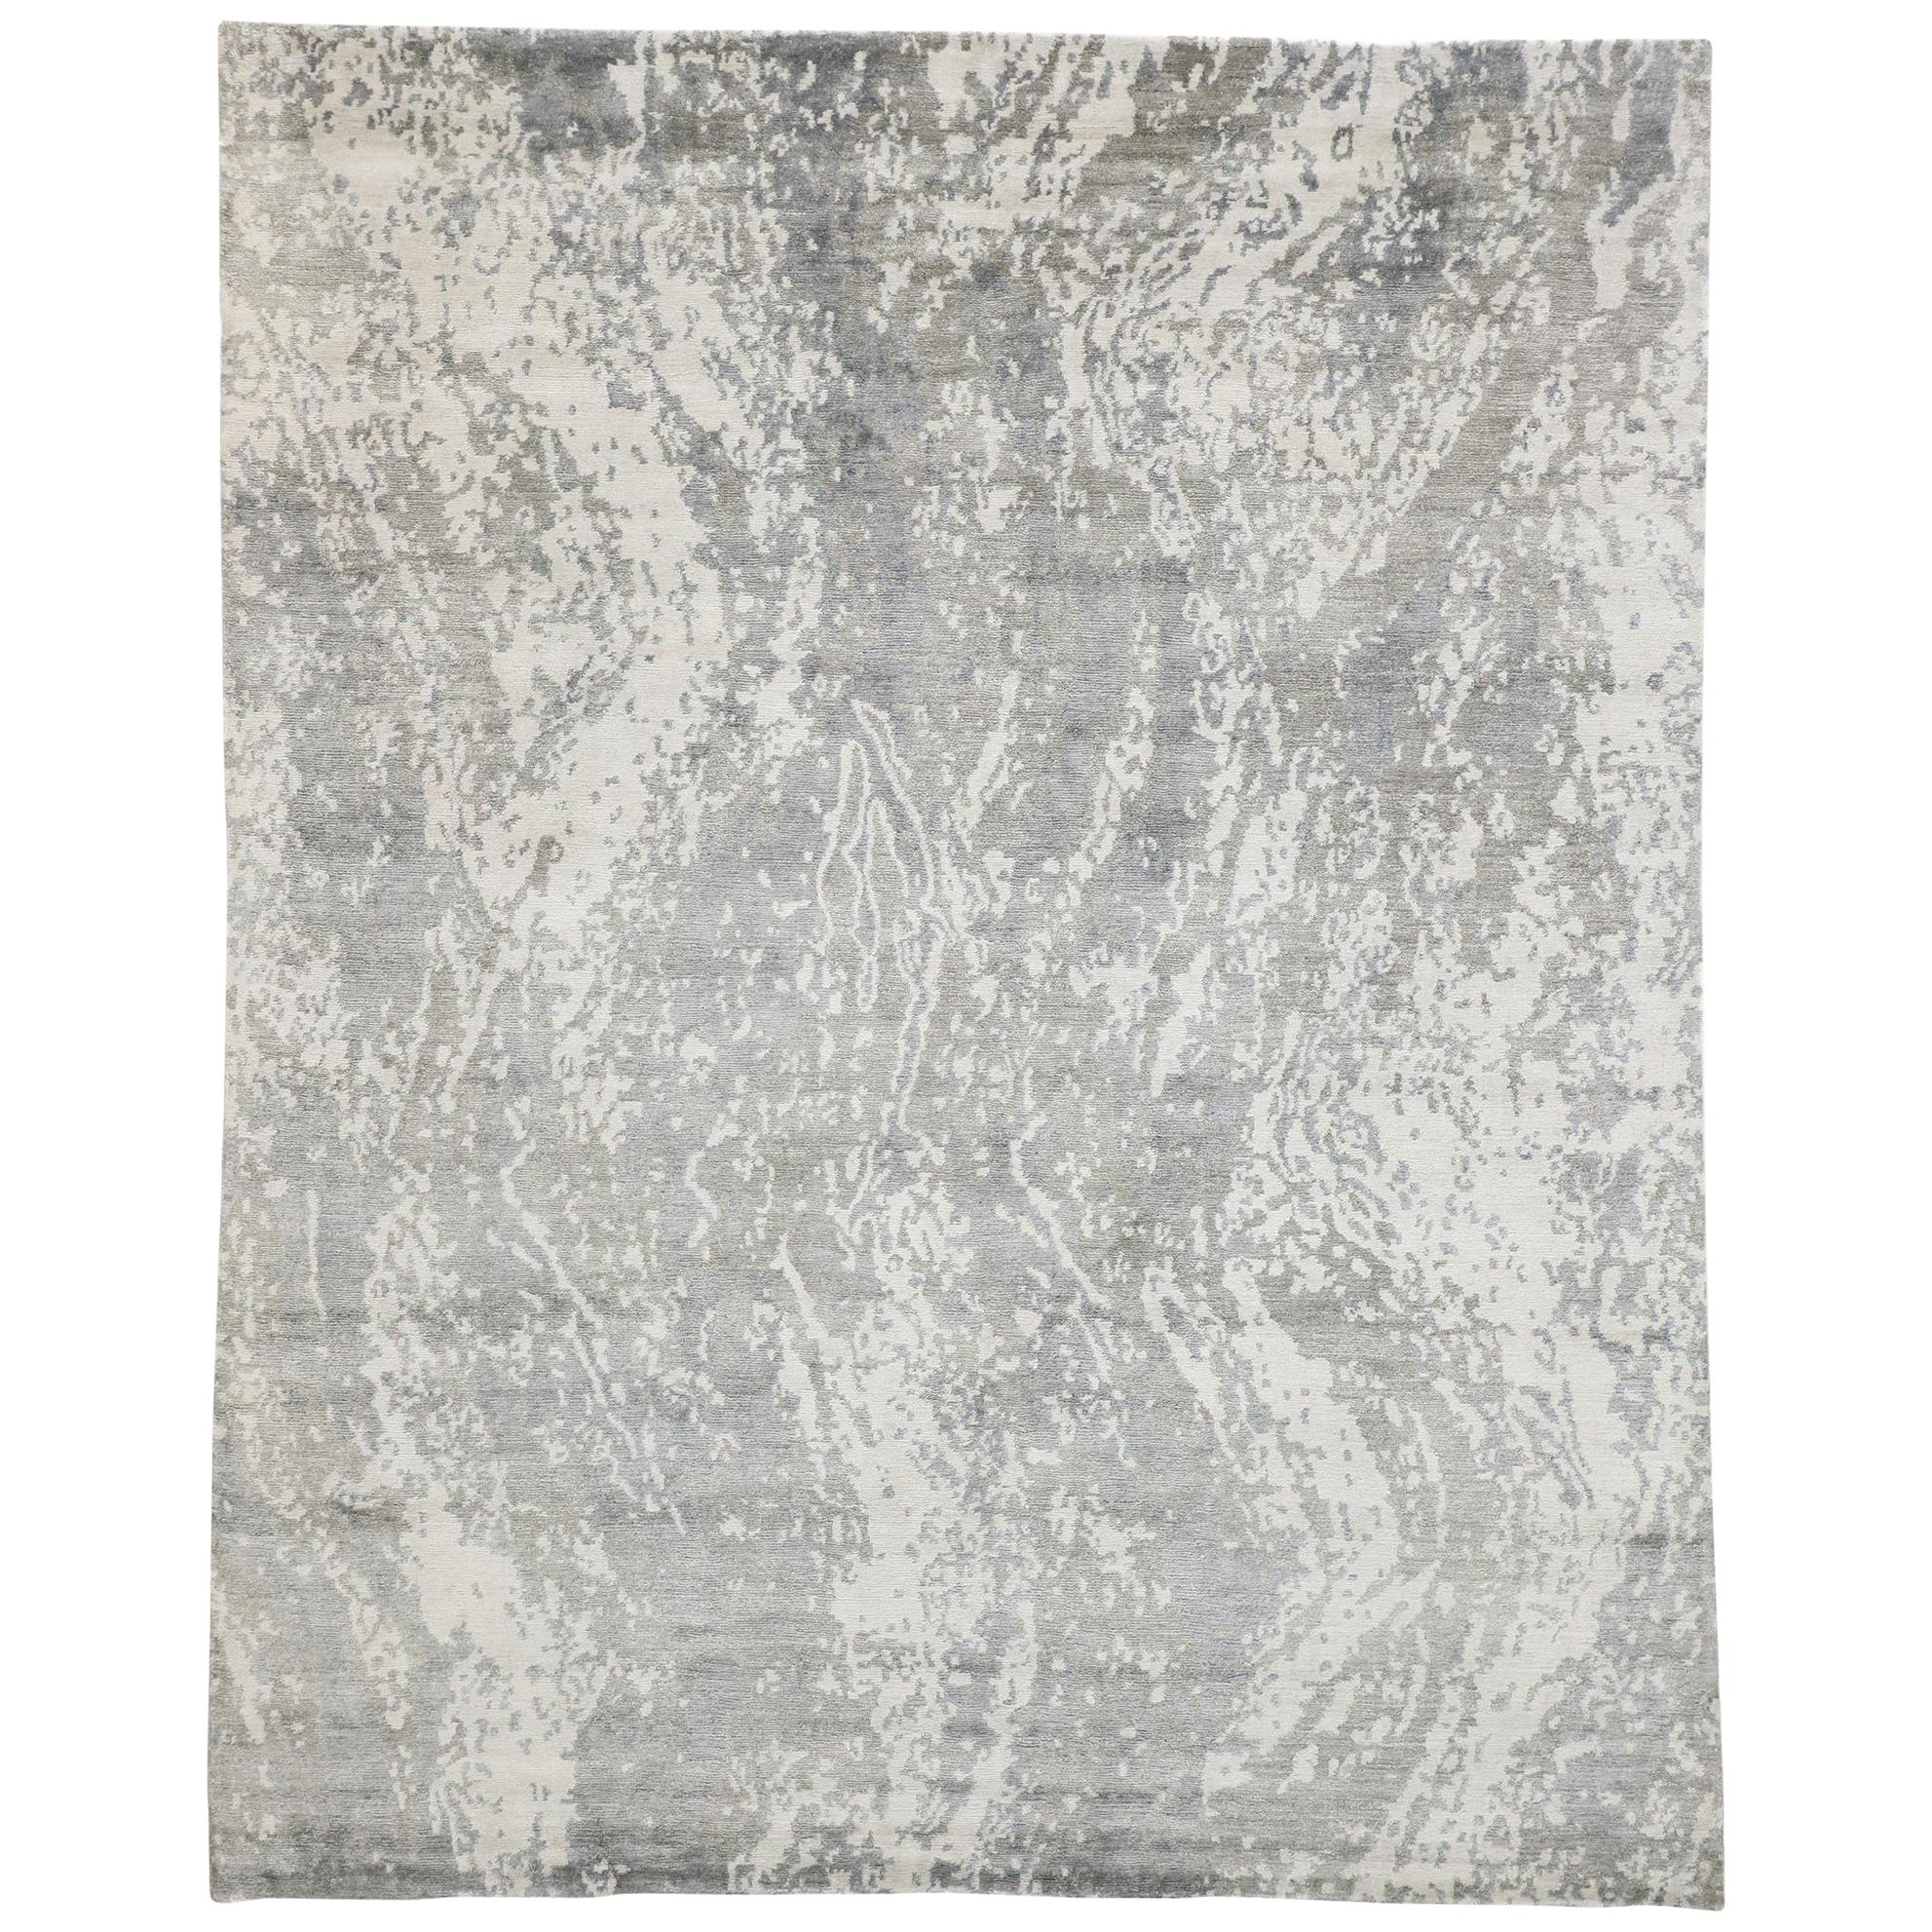 New Contemporary Gray Area Rug with Grunge Art Style For Sale